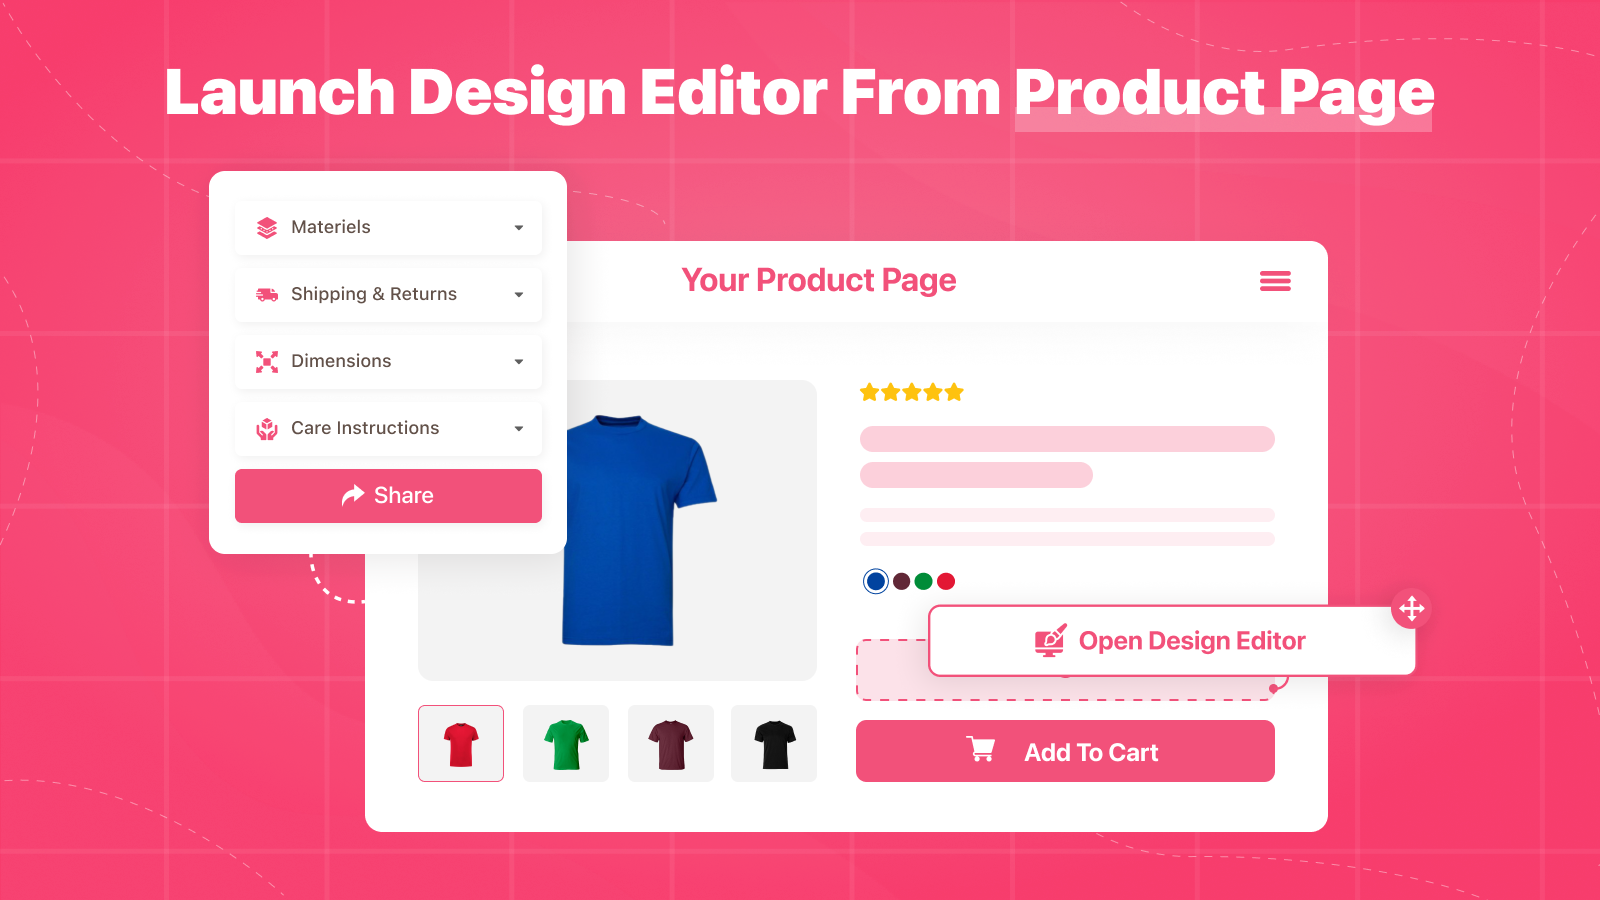 Launch Design Editor From Product Page